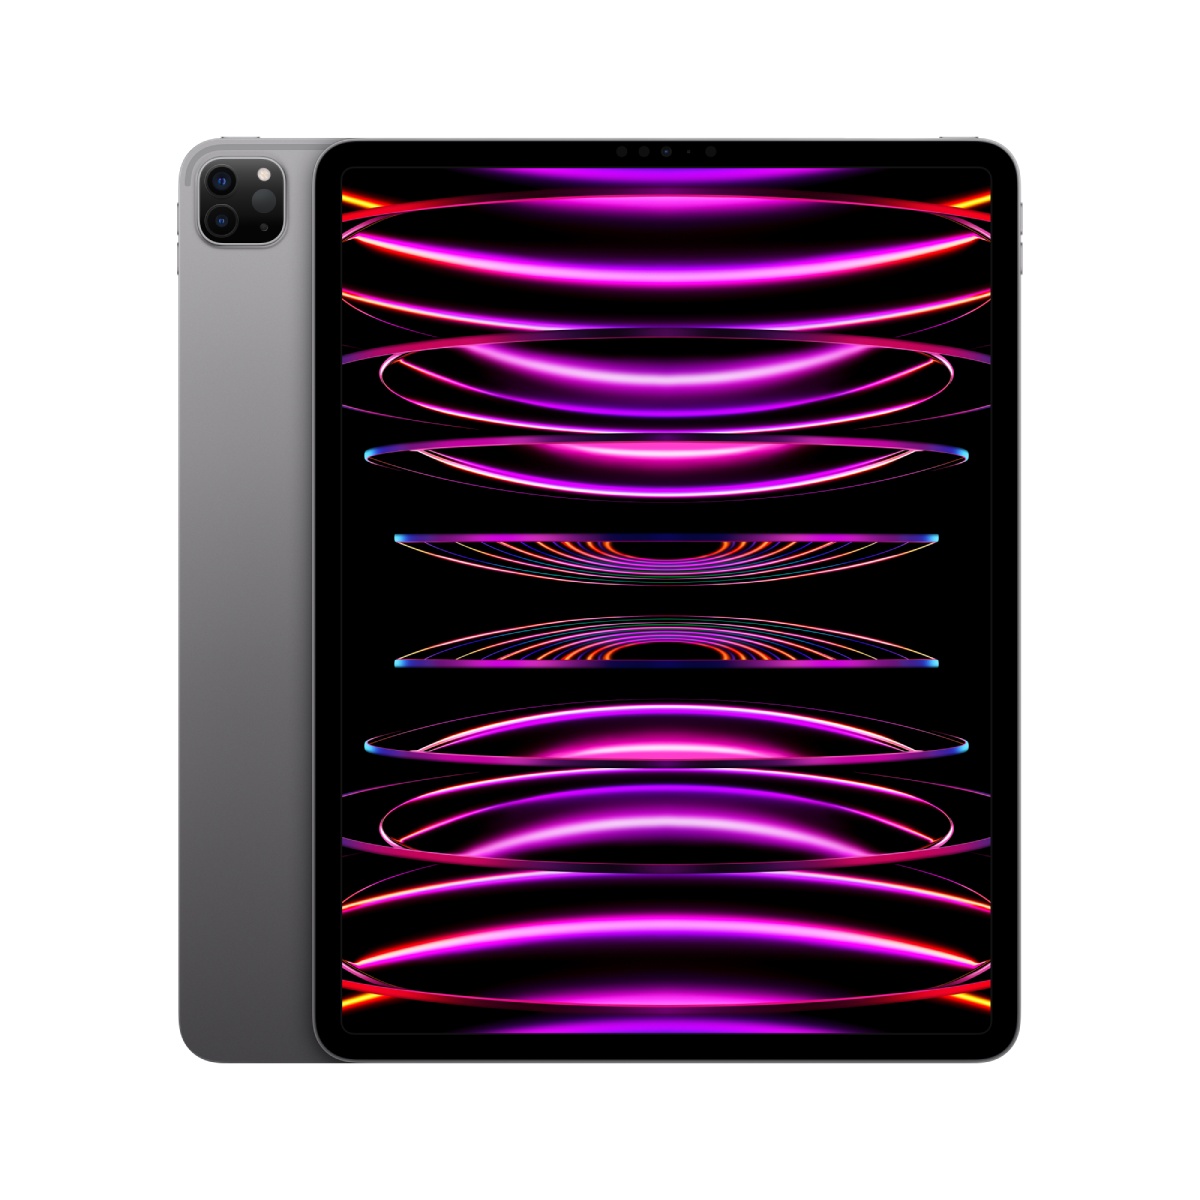 12.9-inch iPad Pro (6th Gen) Wi-Fi, , large image number 0